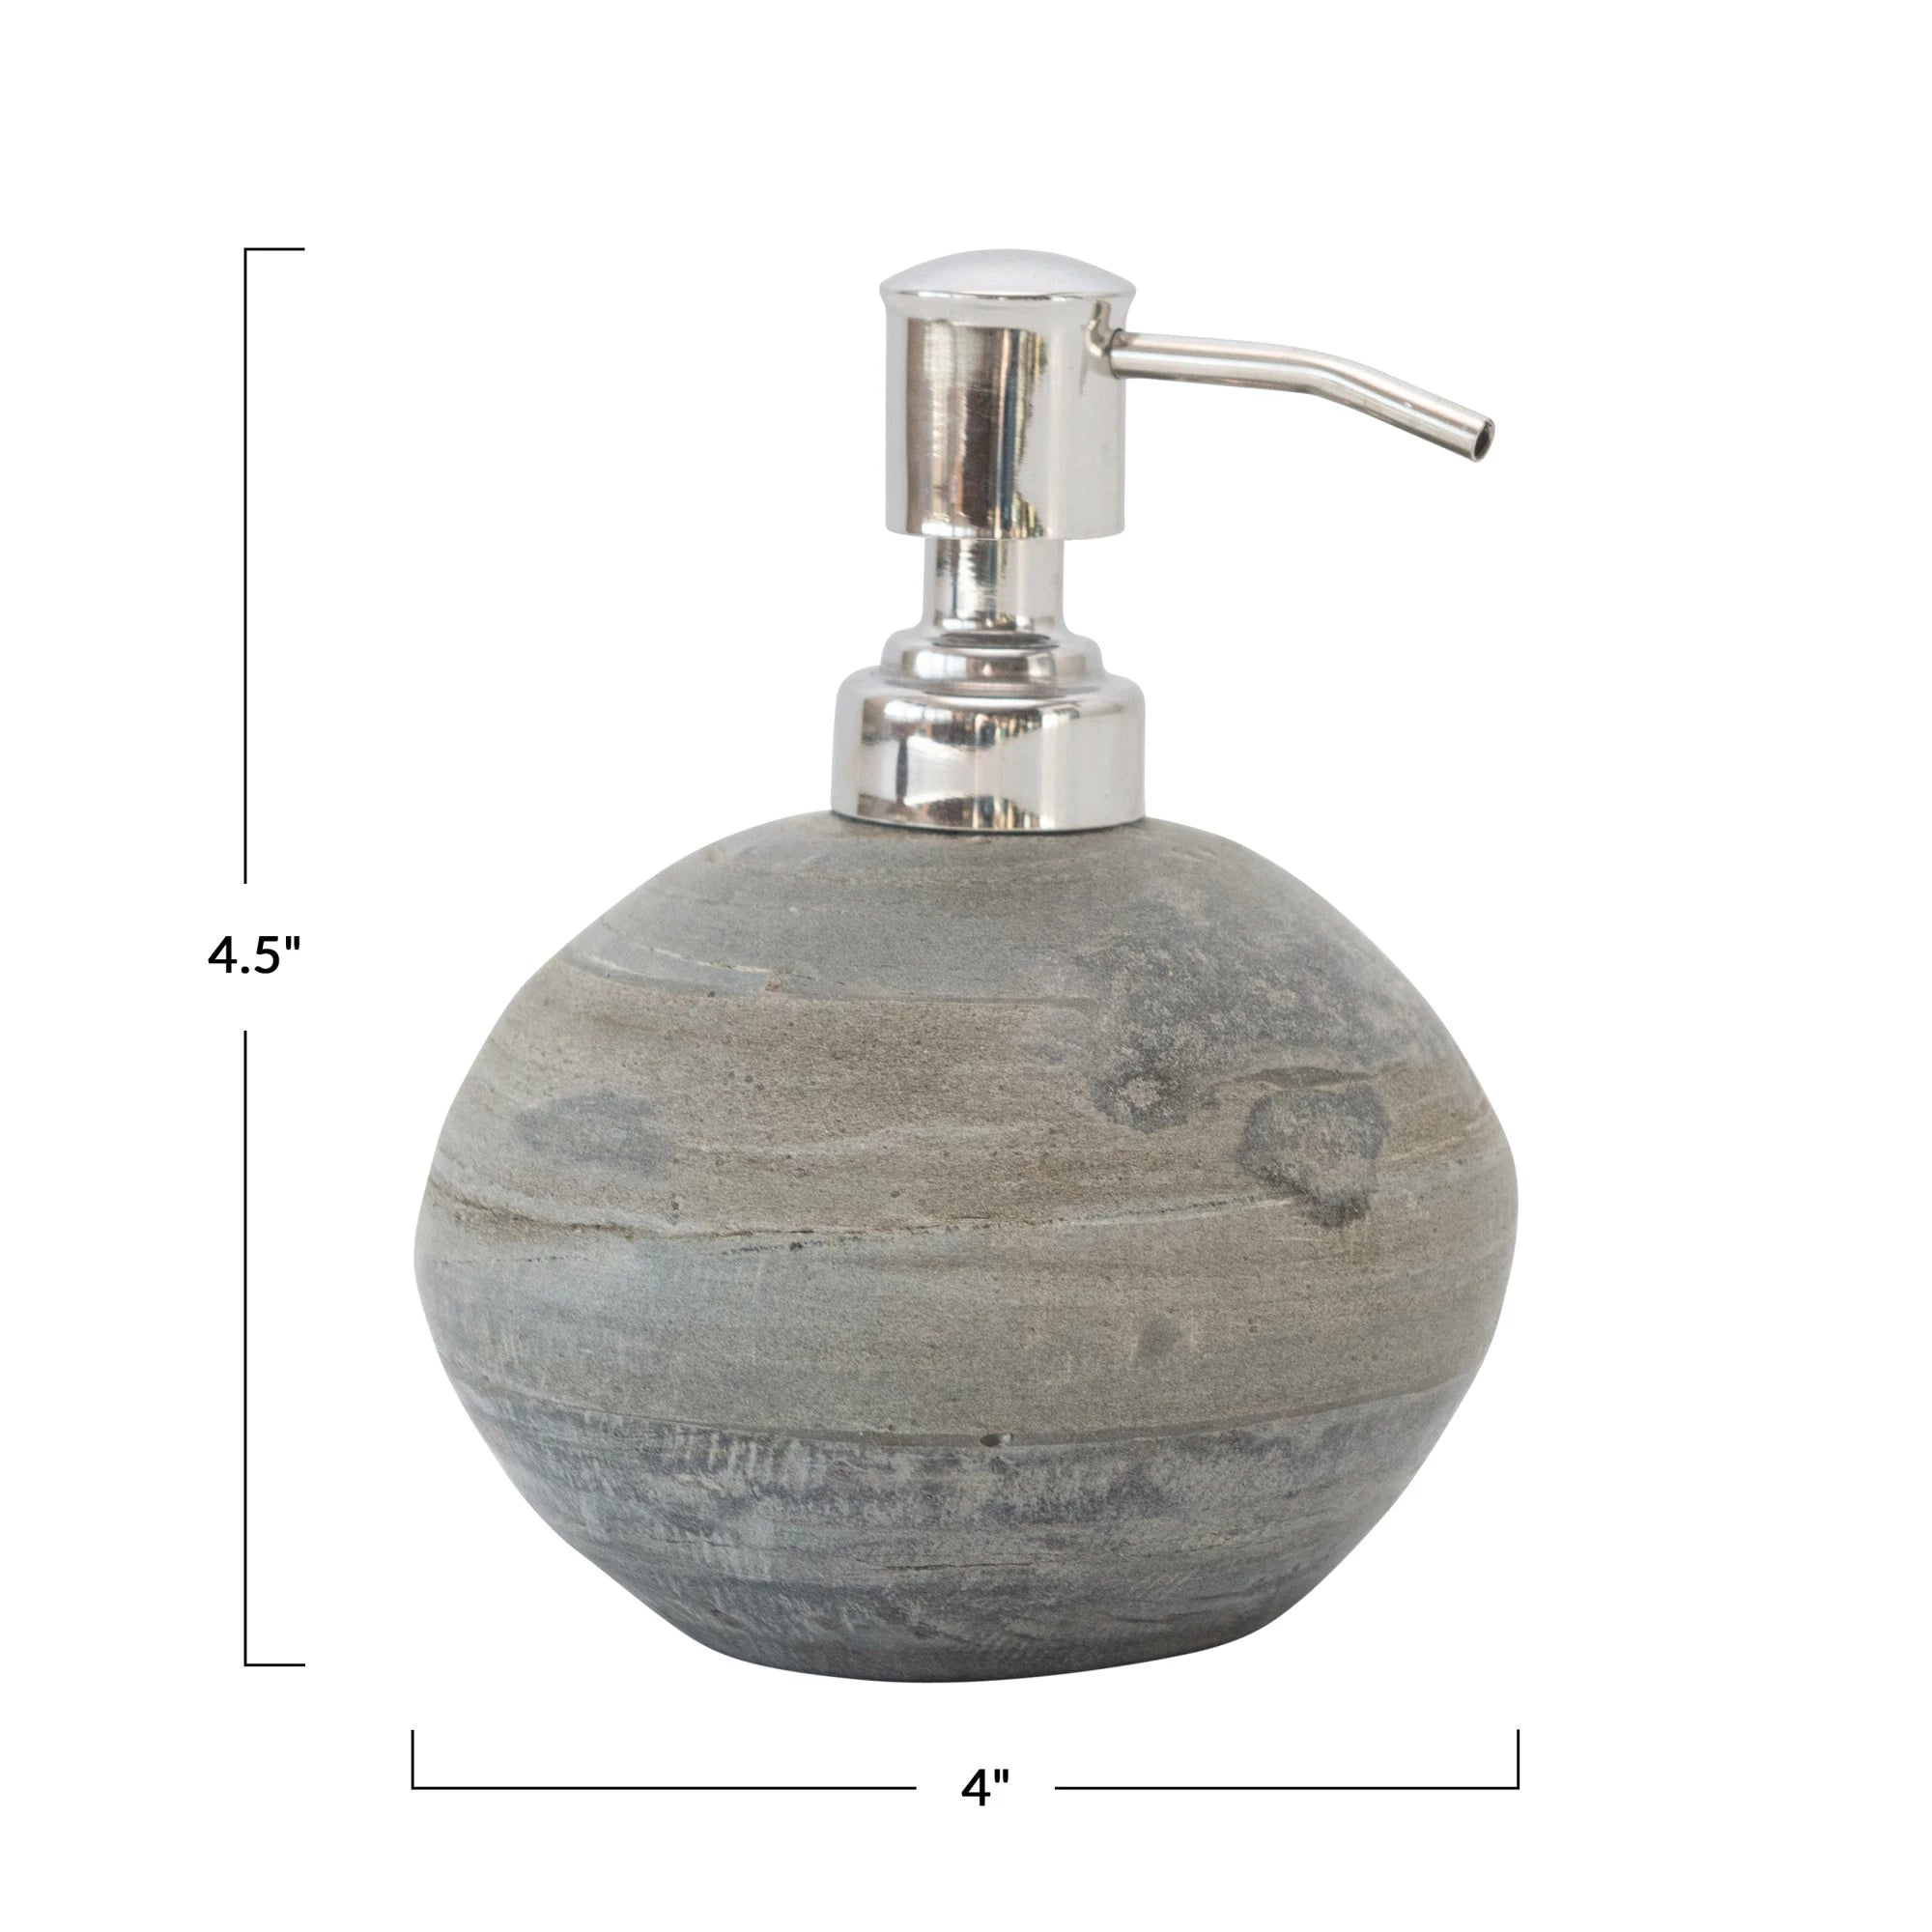 We love to add a natural element to the bathroom and this Natural Slate Soap Dispenser with Pump is a stunning but purposeful way to do that.  Size: 4" Round x 4.5 "H